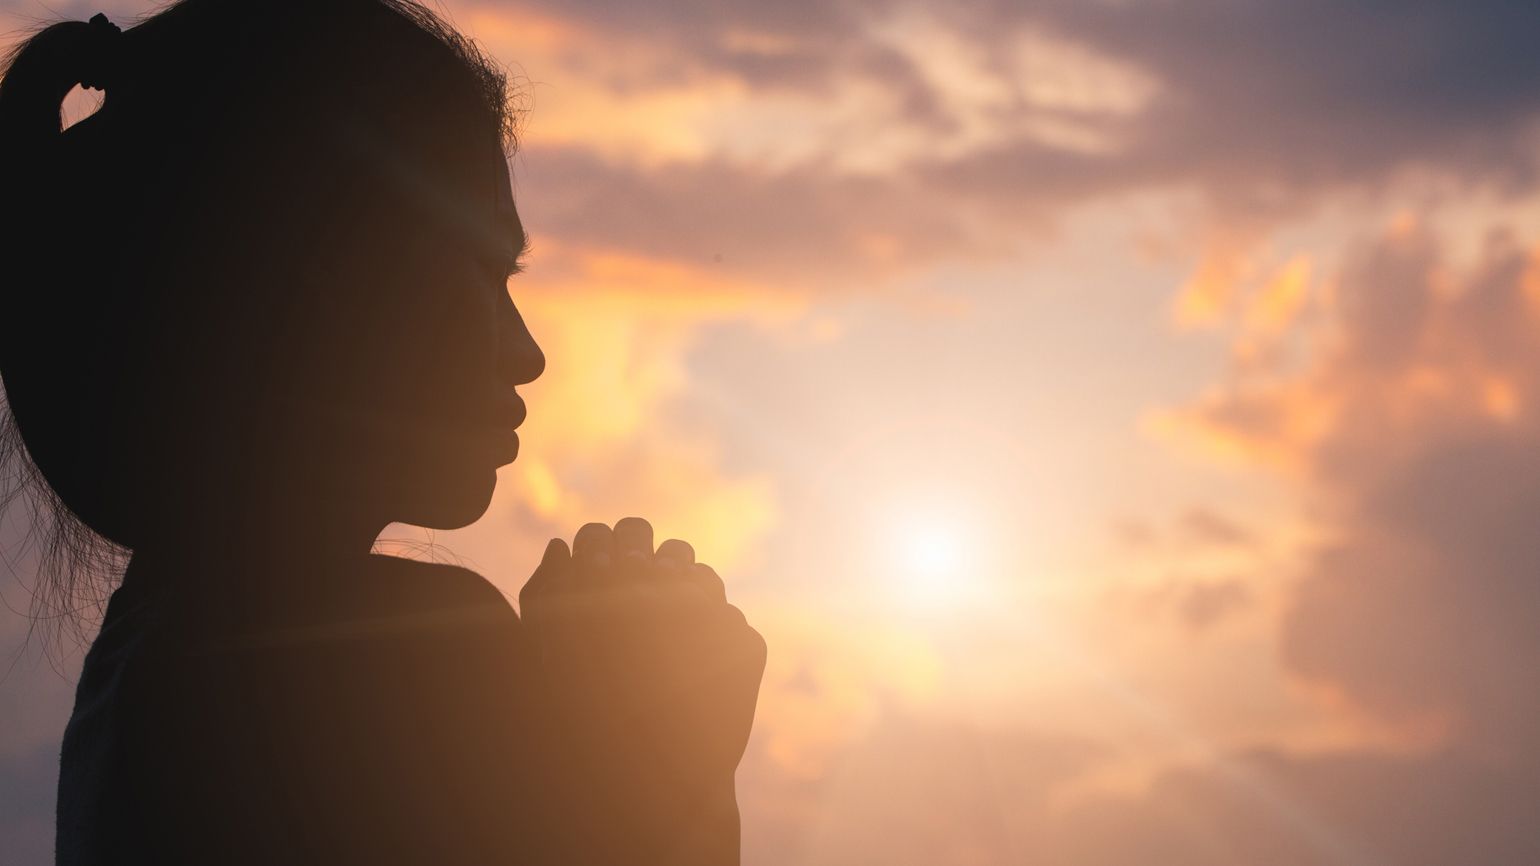 Silouette of a young woman in prayer.